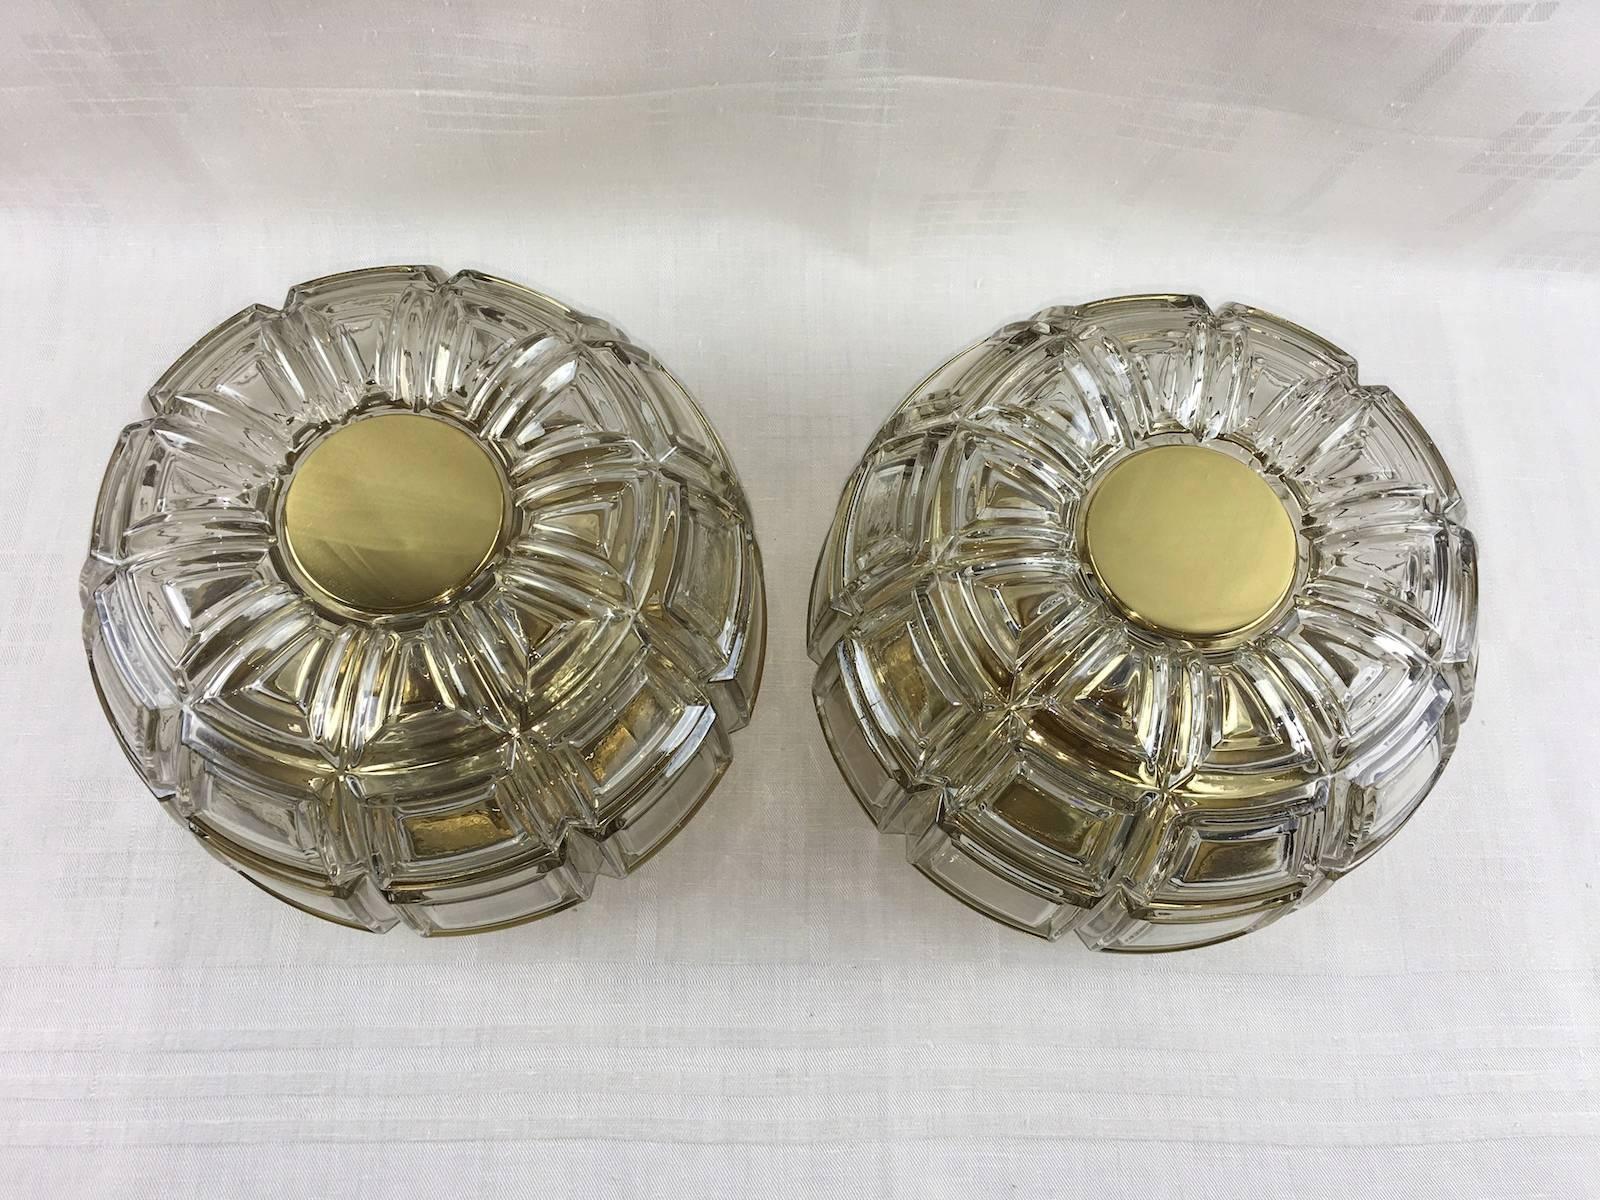 Pair of brass and amber glass sconces or flush mount manufactured by Limburg Glashütte, Germany, circa 1960-1969. 
Each fixture takes one E27 base Edison bulb up to 75 watts per bulb.